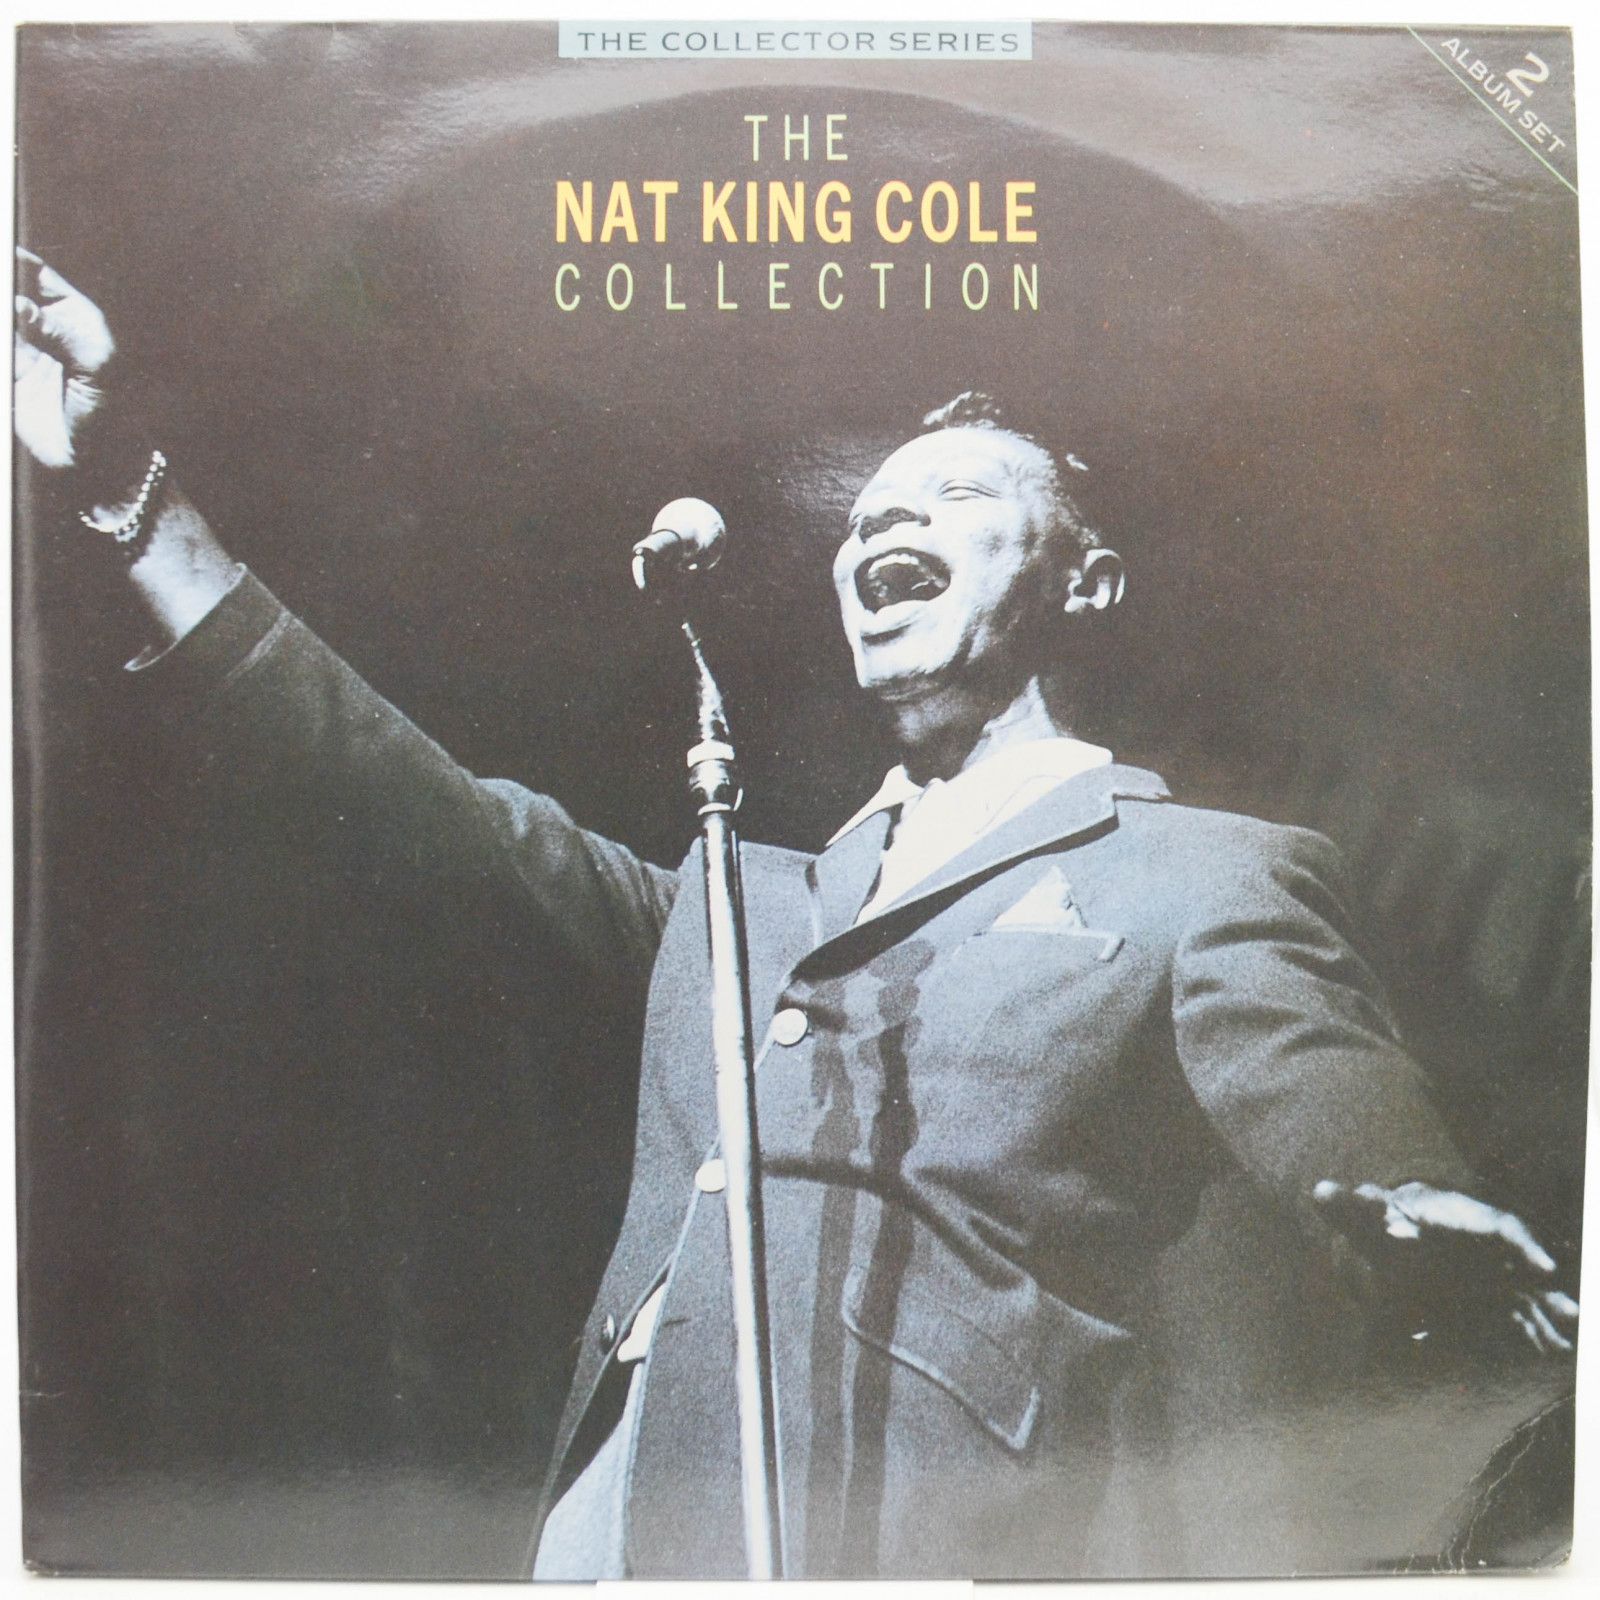 Nat King Cole — The Nat King Cole Collection (2LP, UK), 1986